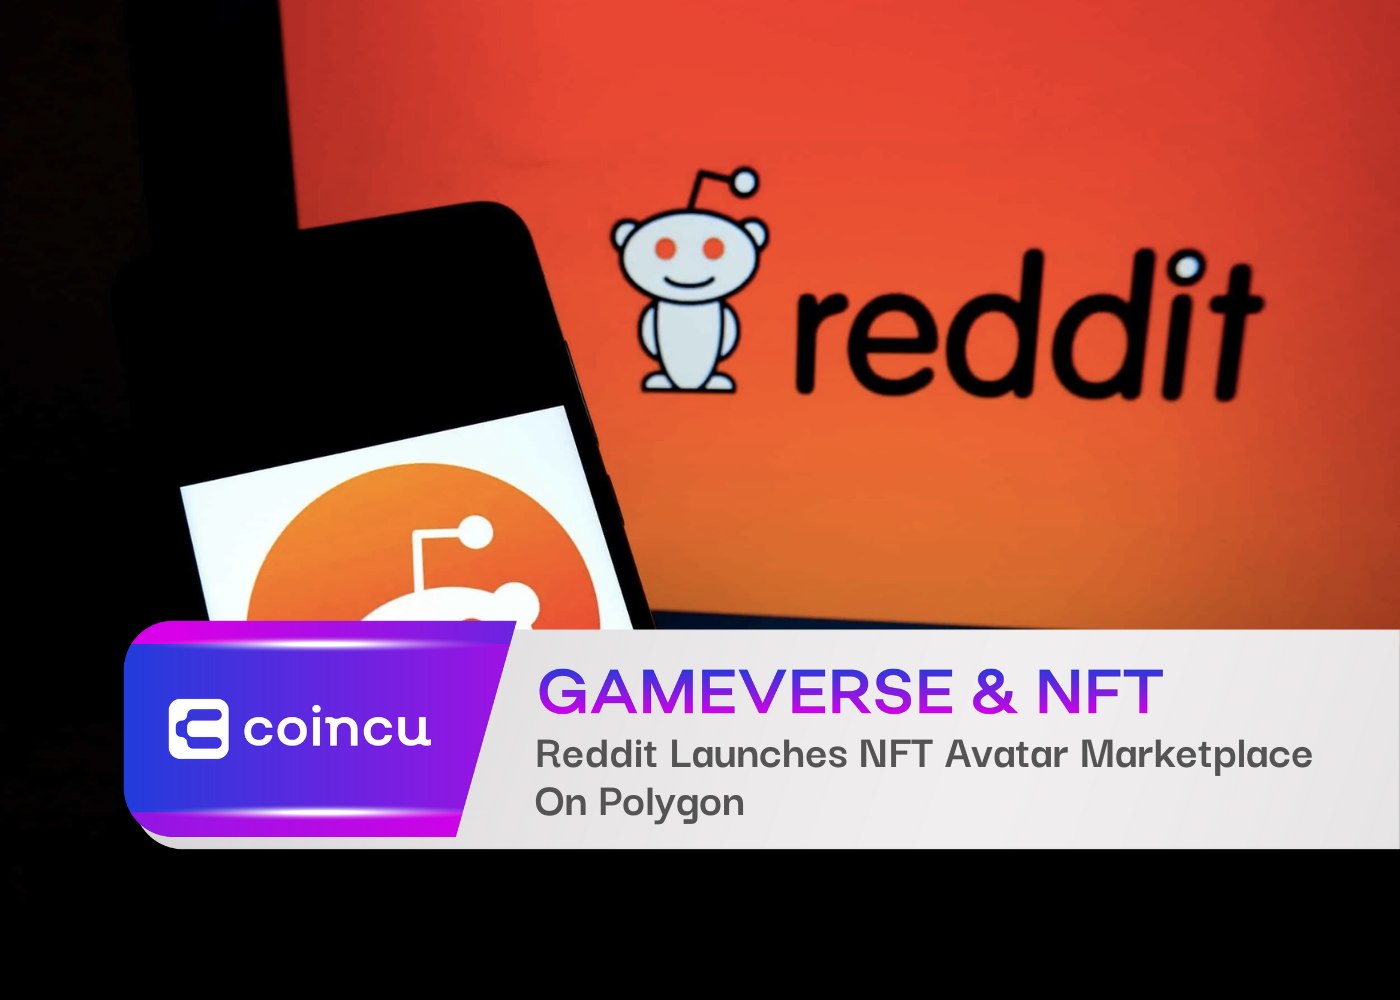 Reddit Launches NFT Avatar Marketplace On Polygon